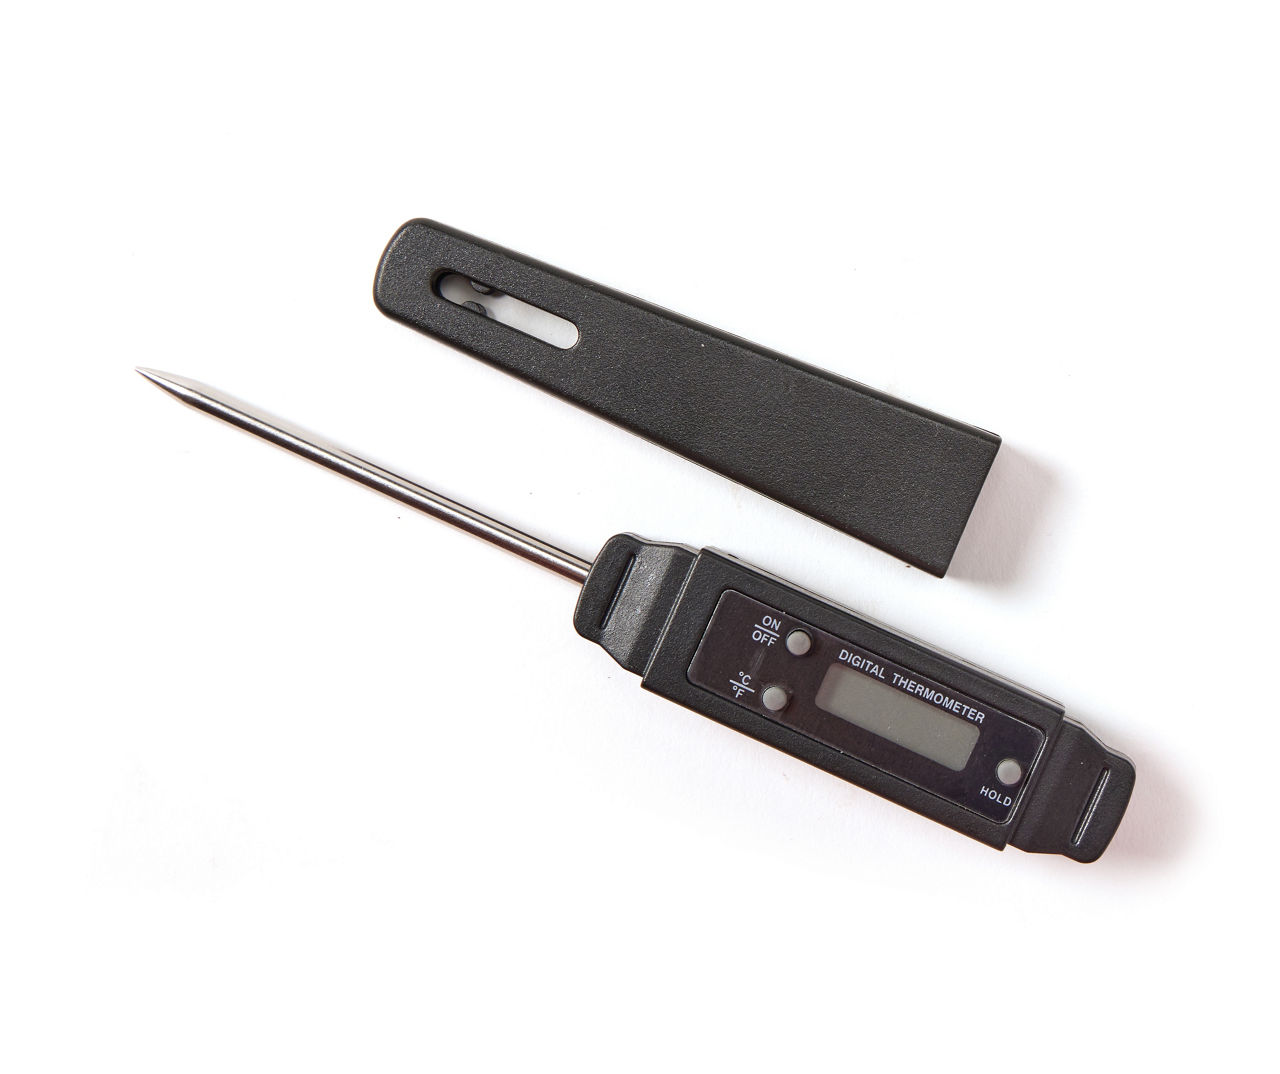 Crofton Digital Meat Thermometer